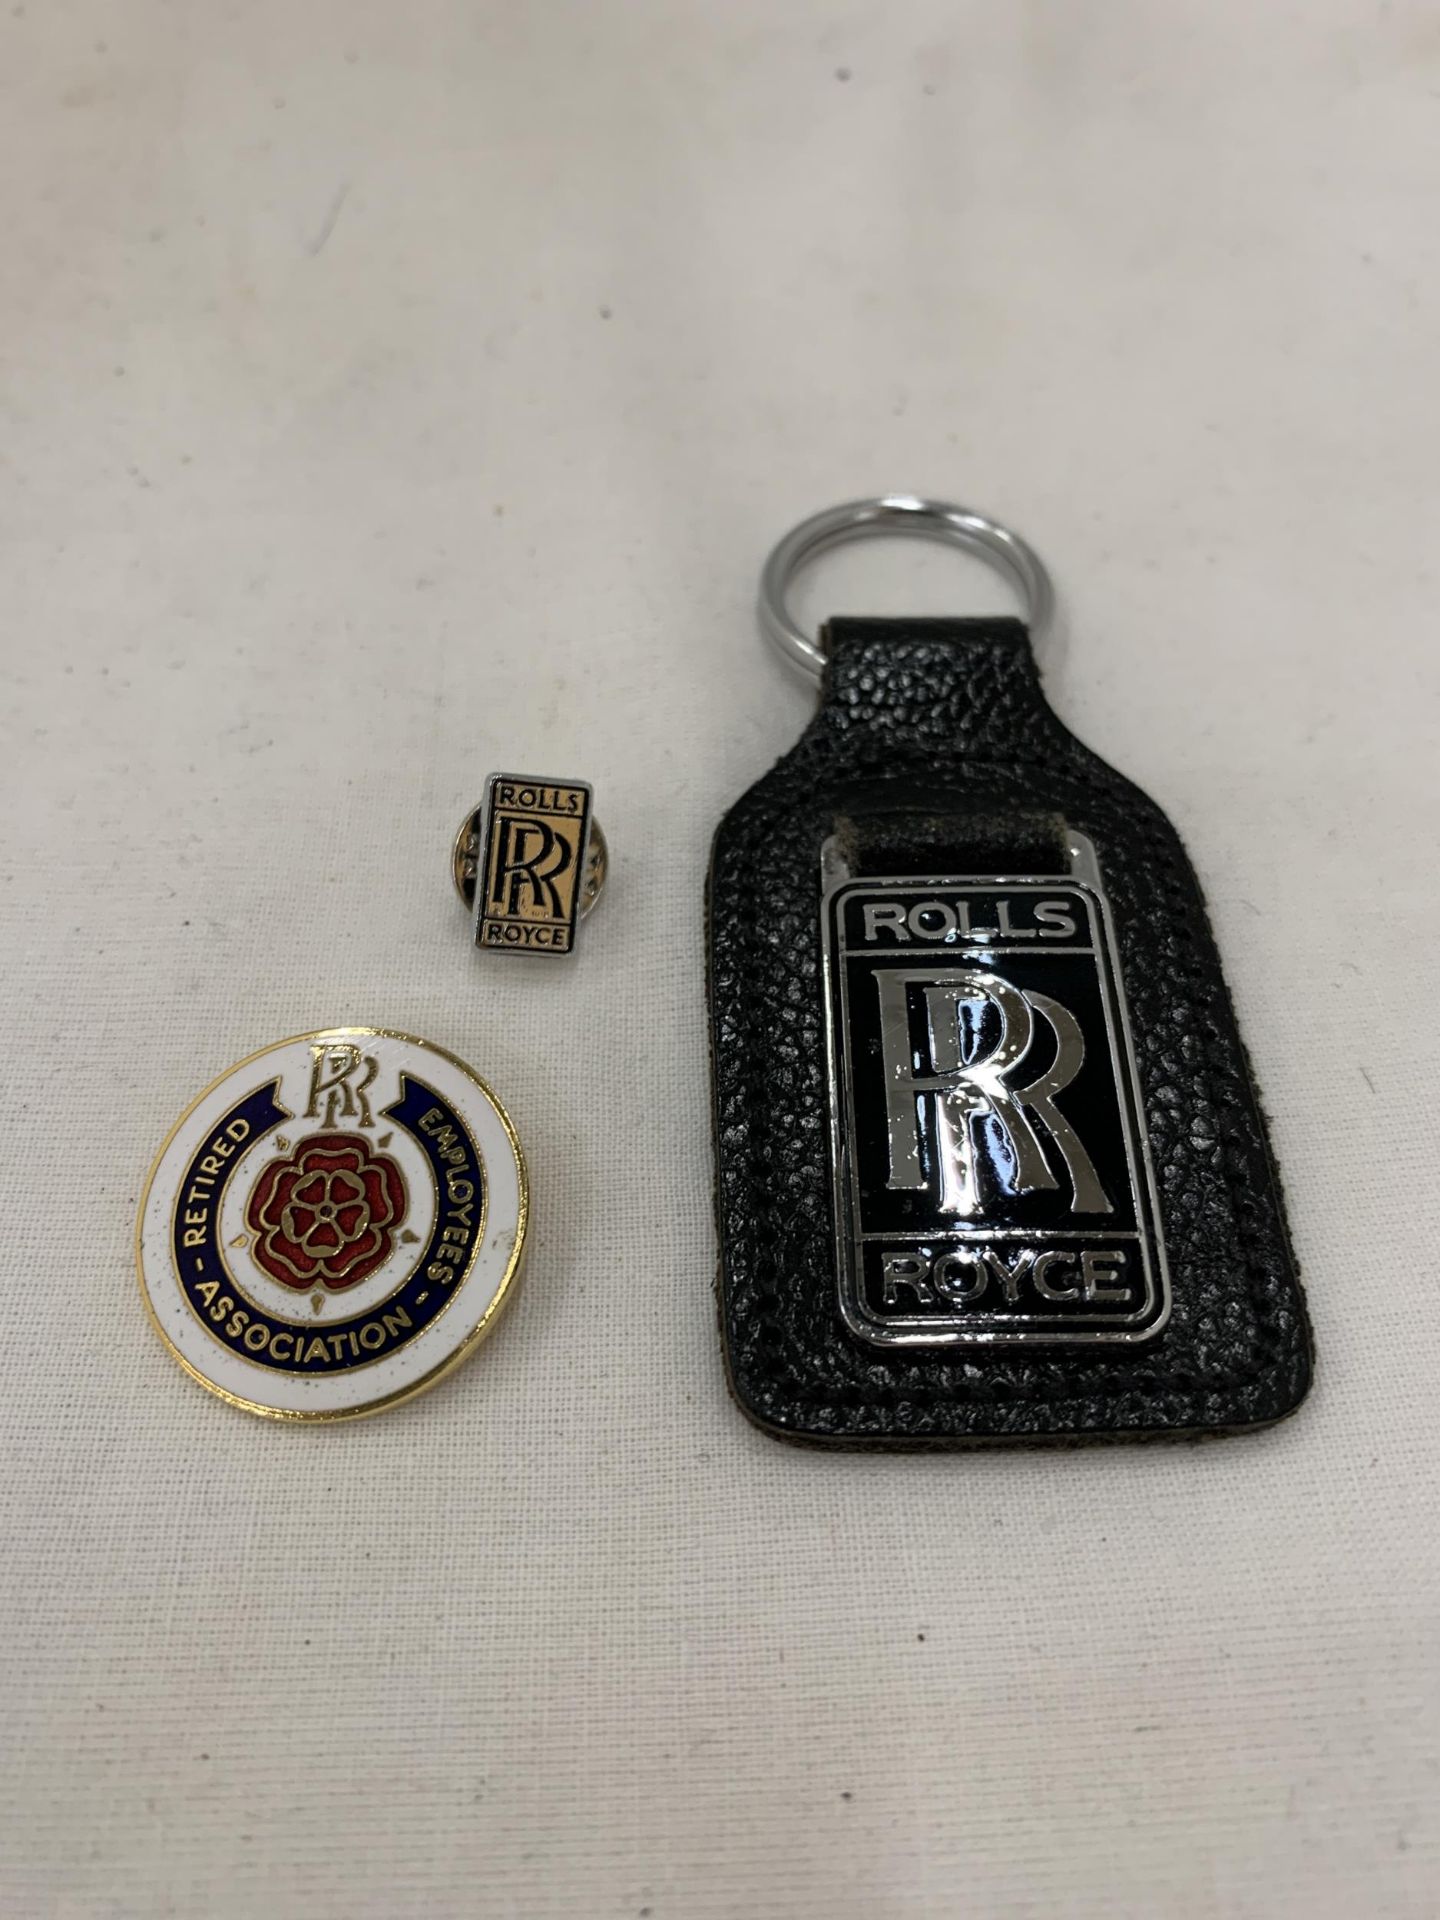 TWO ROLLS ROYCE BADGES AND A KEY FOB